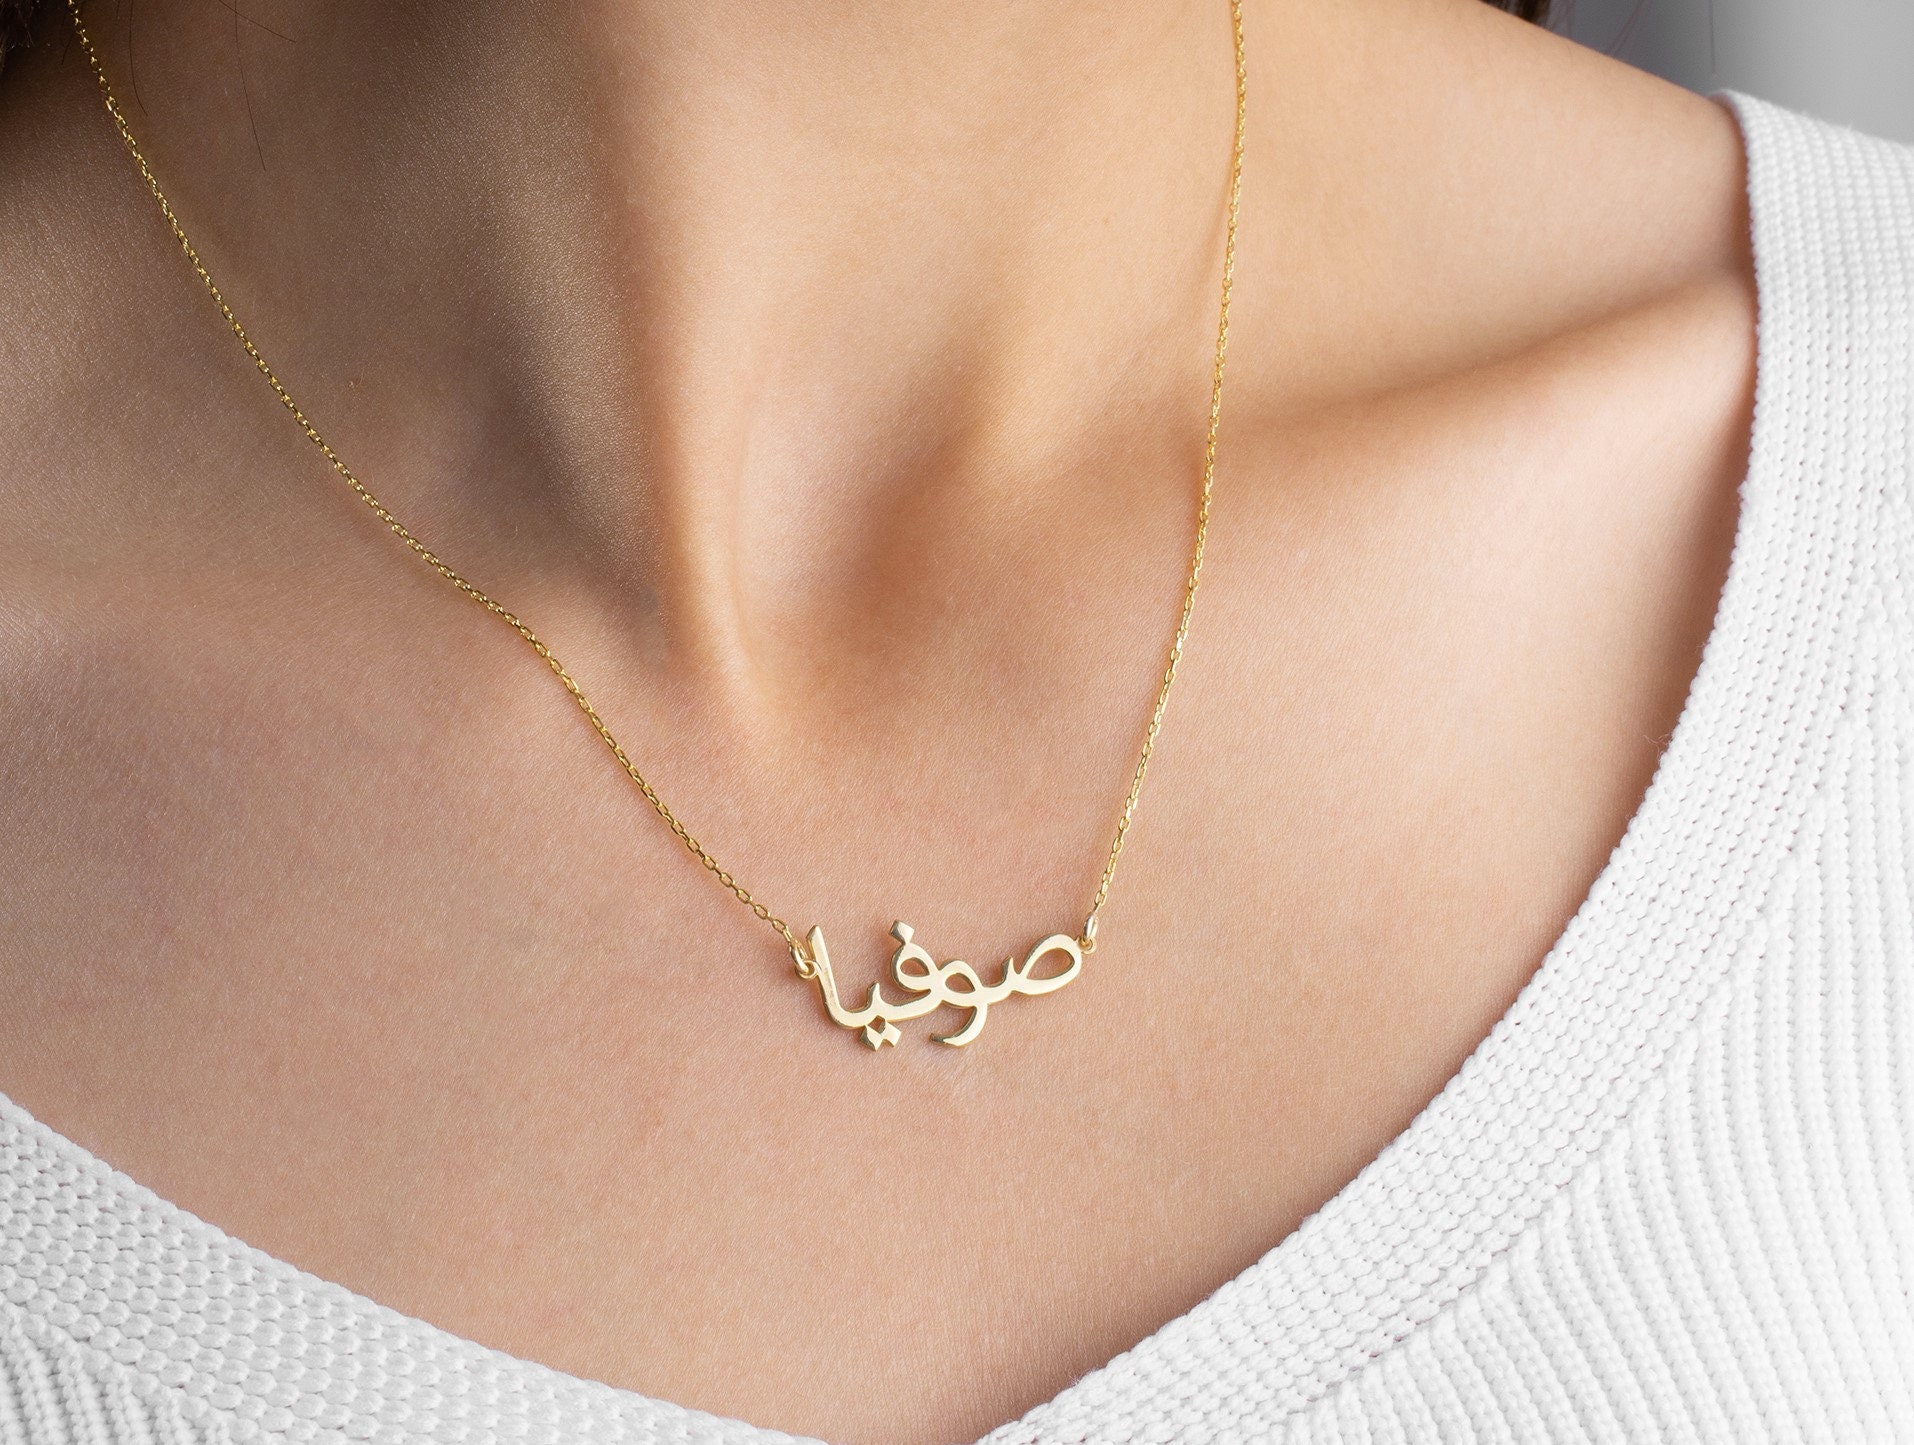 Arabic Engraved Coin Necklace | Fast Delivery Crafted in South Africa